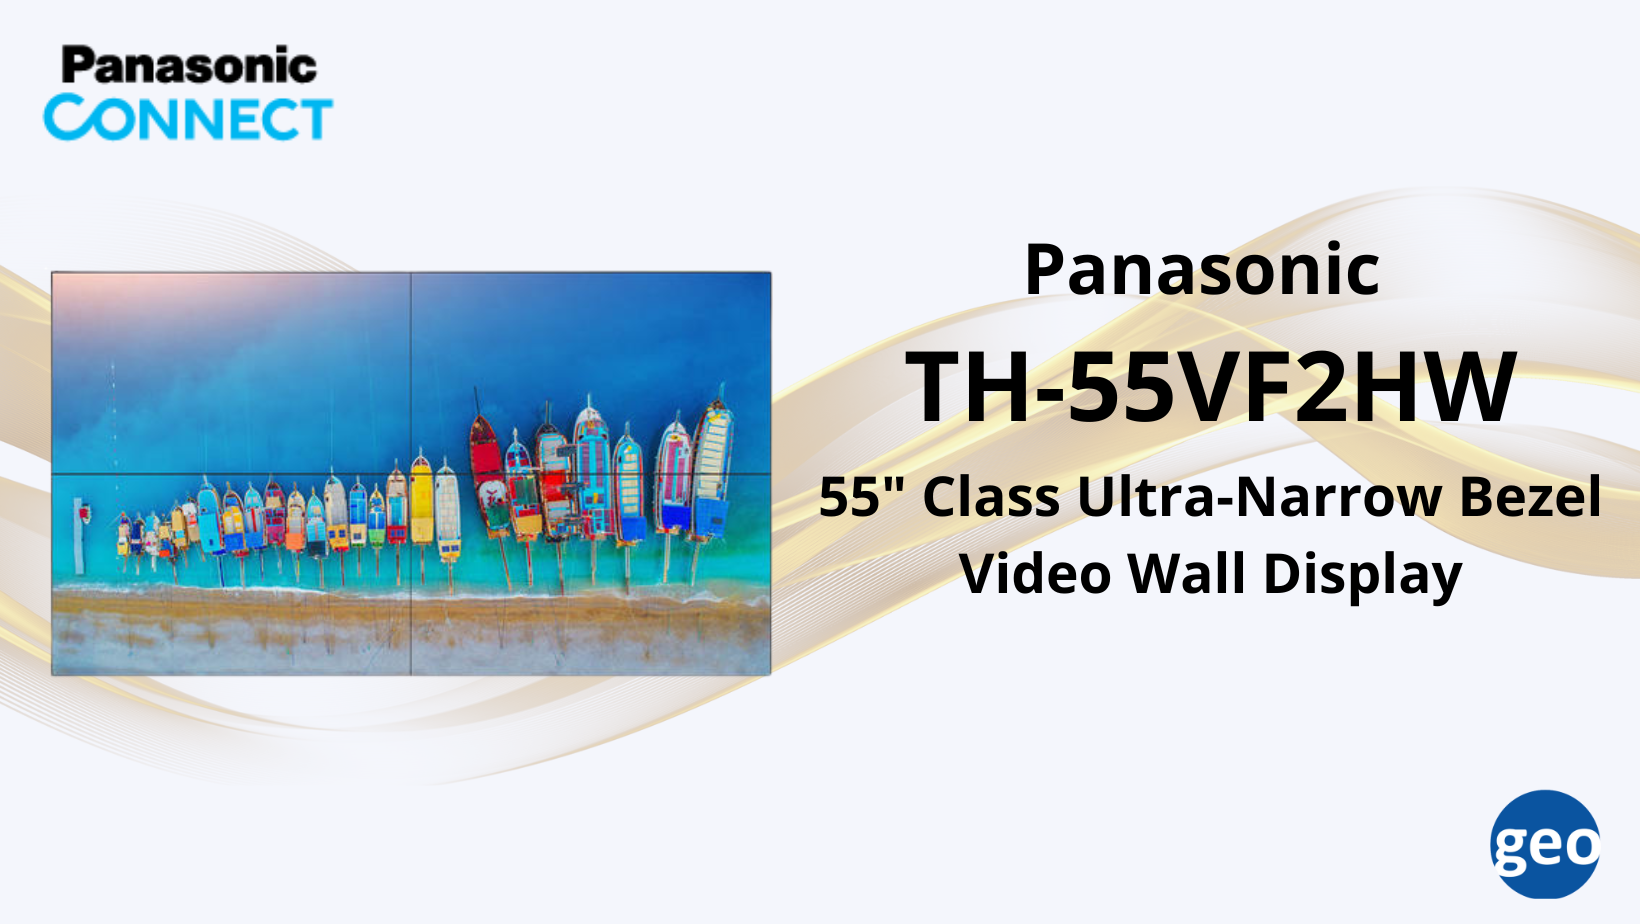 Panasonic TH-55VF2HW 55″ Class Ultra-Narrow Bezel Video Wall Display for Digital signage, Broadcast, and Control rooms.